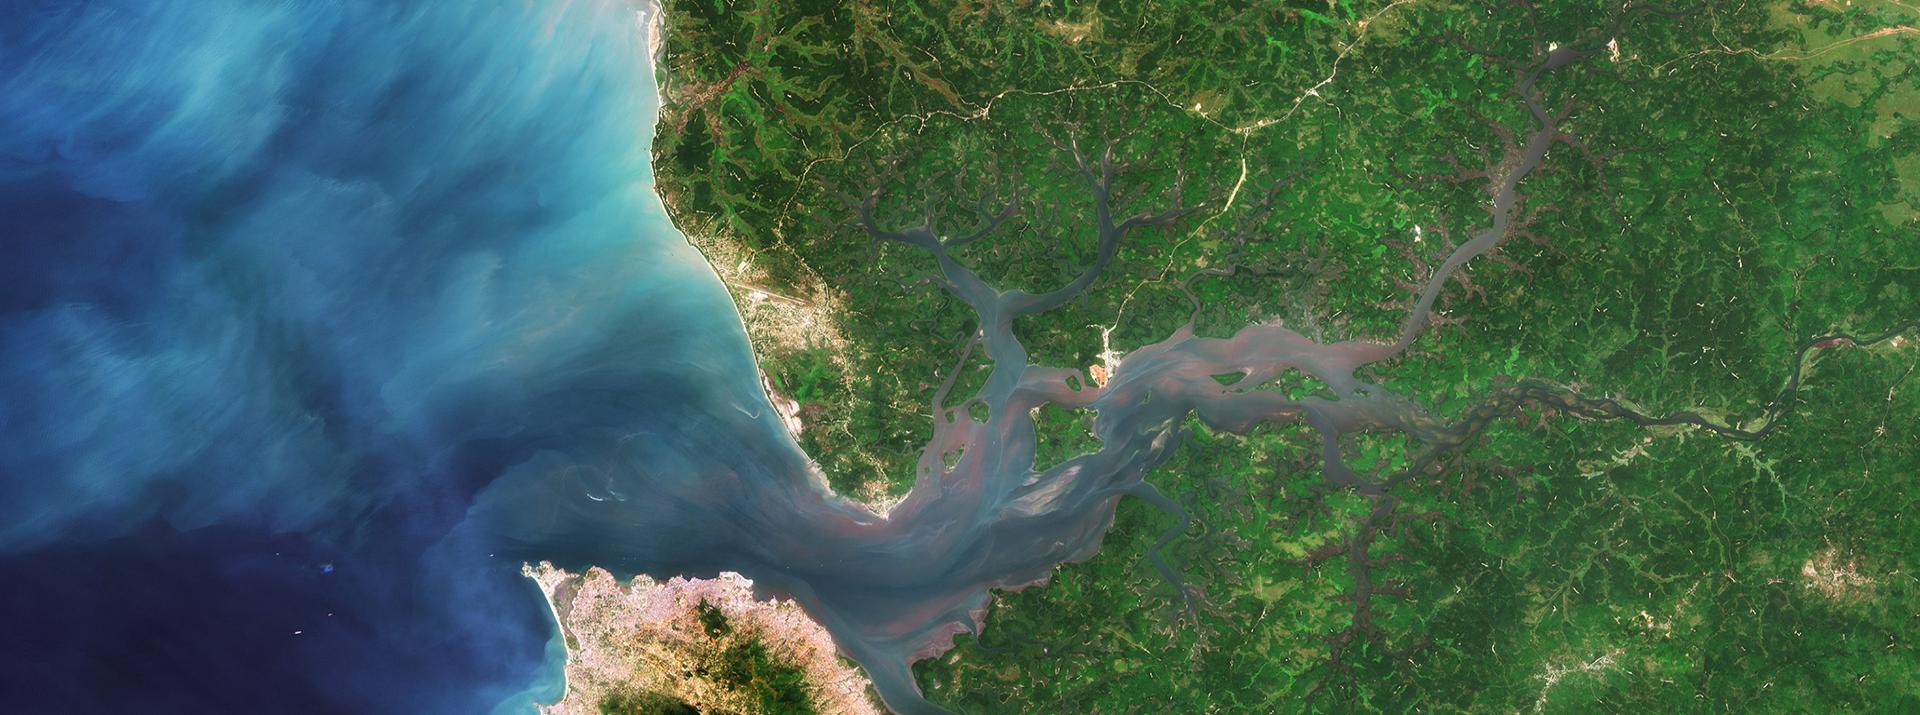 River Estuary Part of Sierra Leone in West Africa is pictured in this image the Sentinel-2A satellite captured on 11 December 2015. (c) ESA